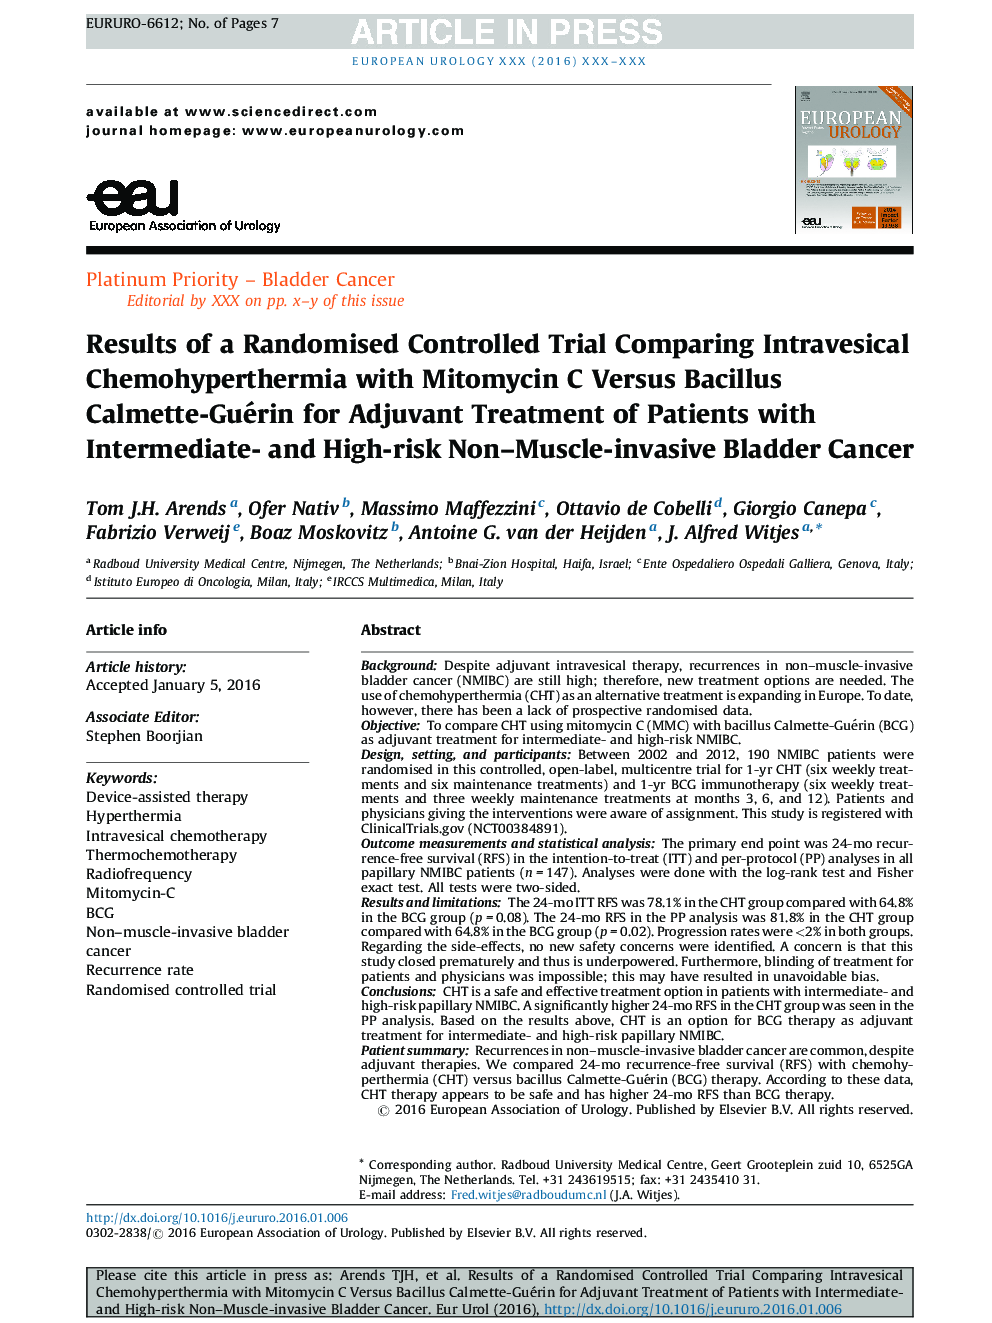 Results of a Randomised Controlled Trial Comparing Intravesical Chemohyperthermia with Mitomycin C Versus Bacillus Calmette-Guérin for Adjuvant Treatment of Patients with Intermediate- and High-risk Non-Muscle-invasive Bladder Cancer